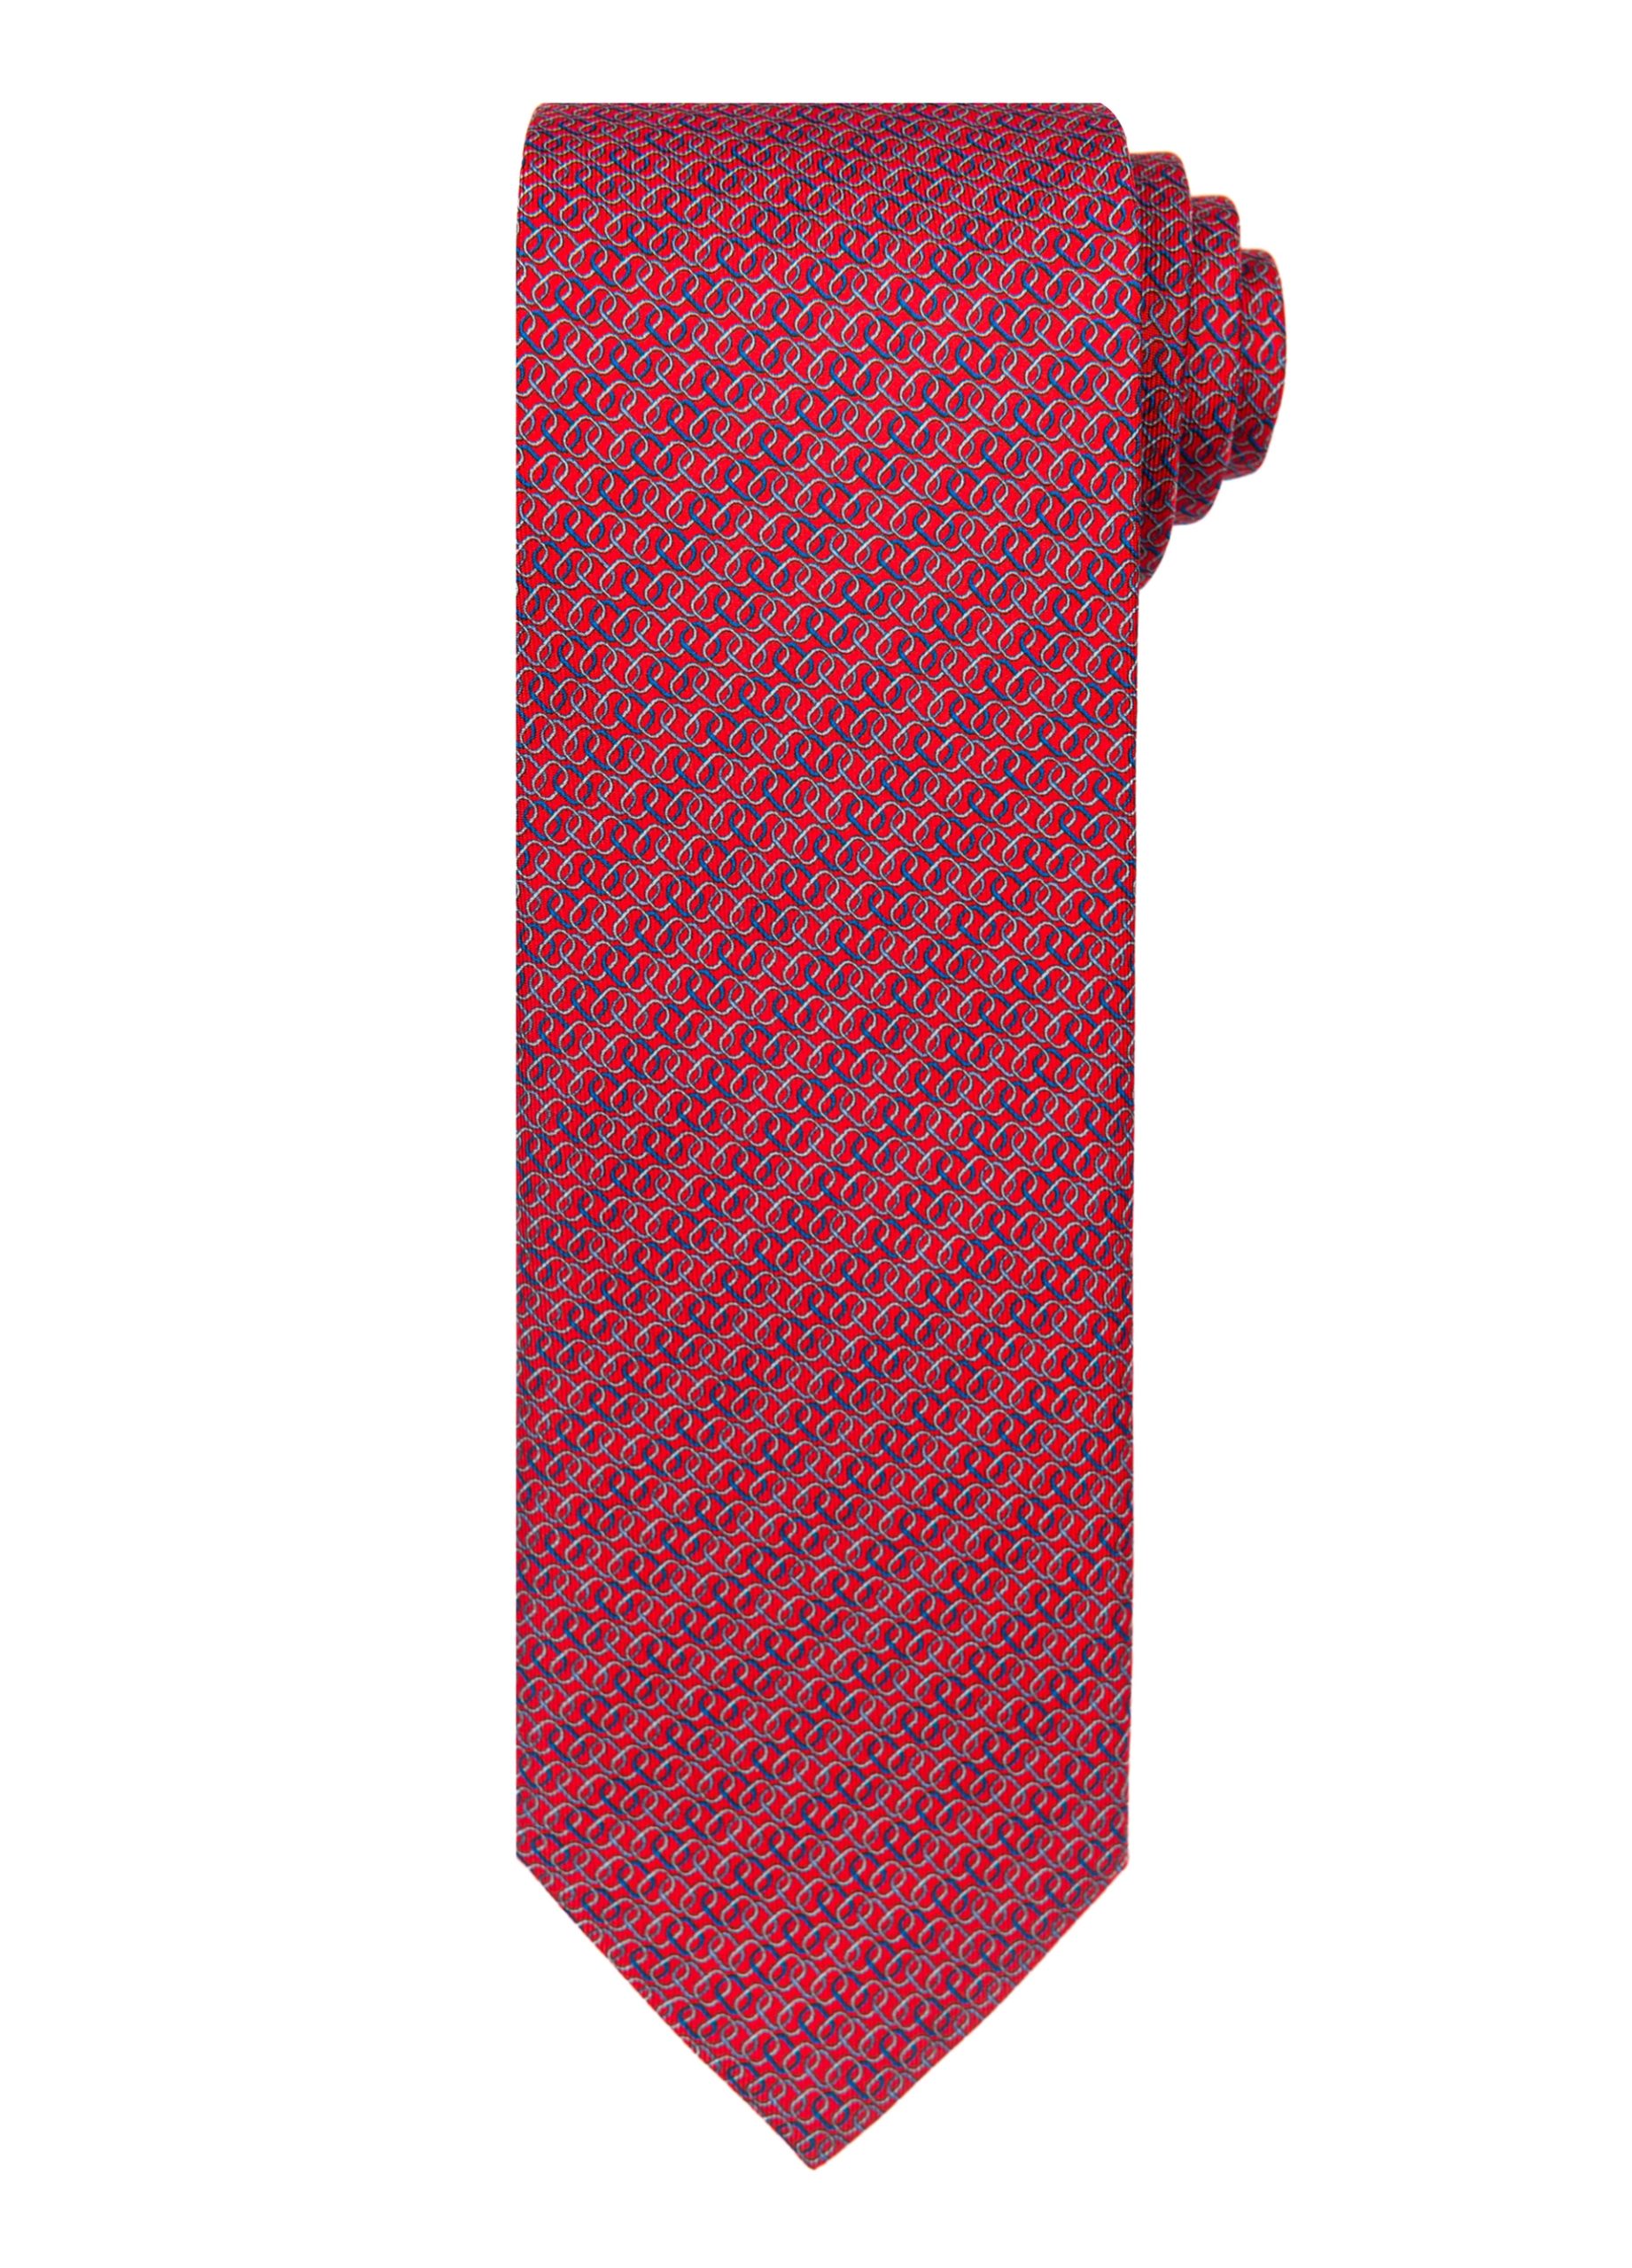 Men’s red and blue smart tie